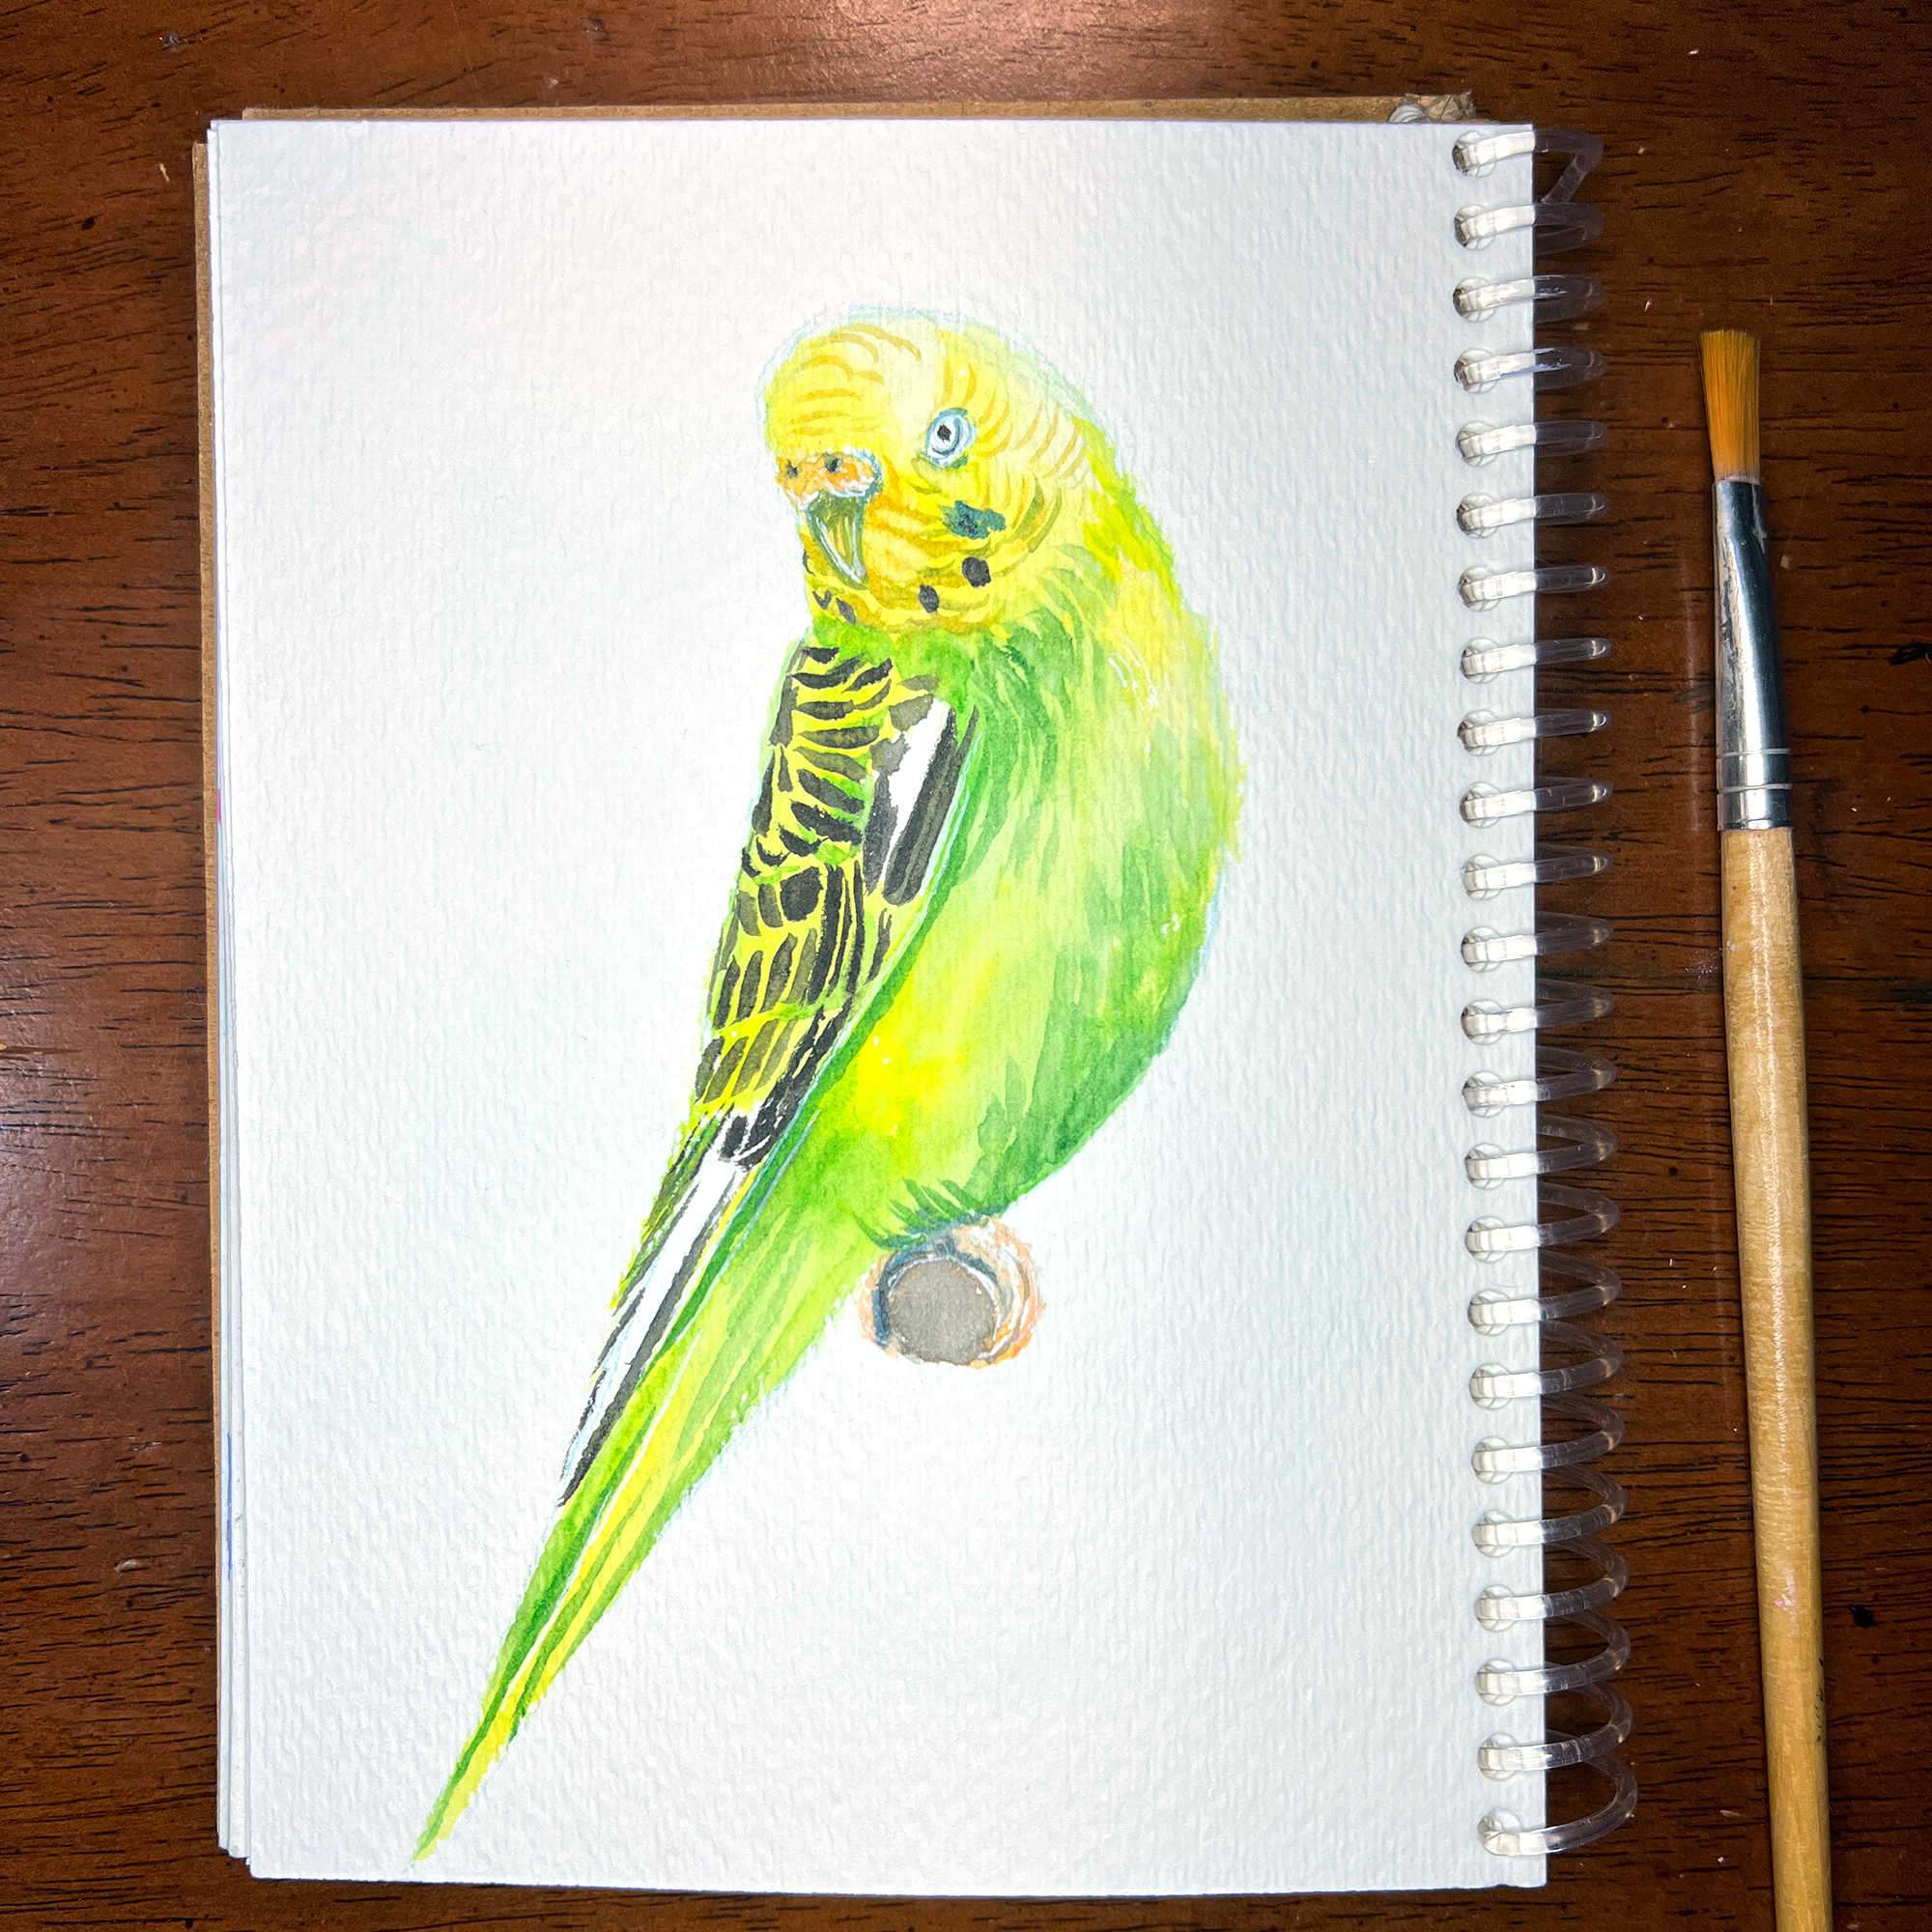 Watercolor sketch of a green parakeet on a spiral notebook.